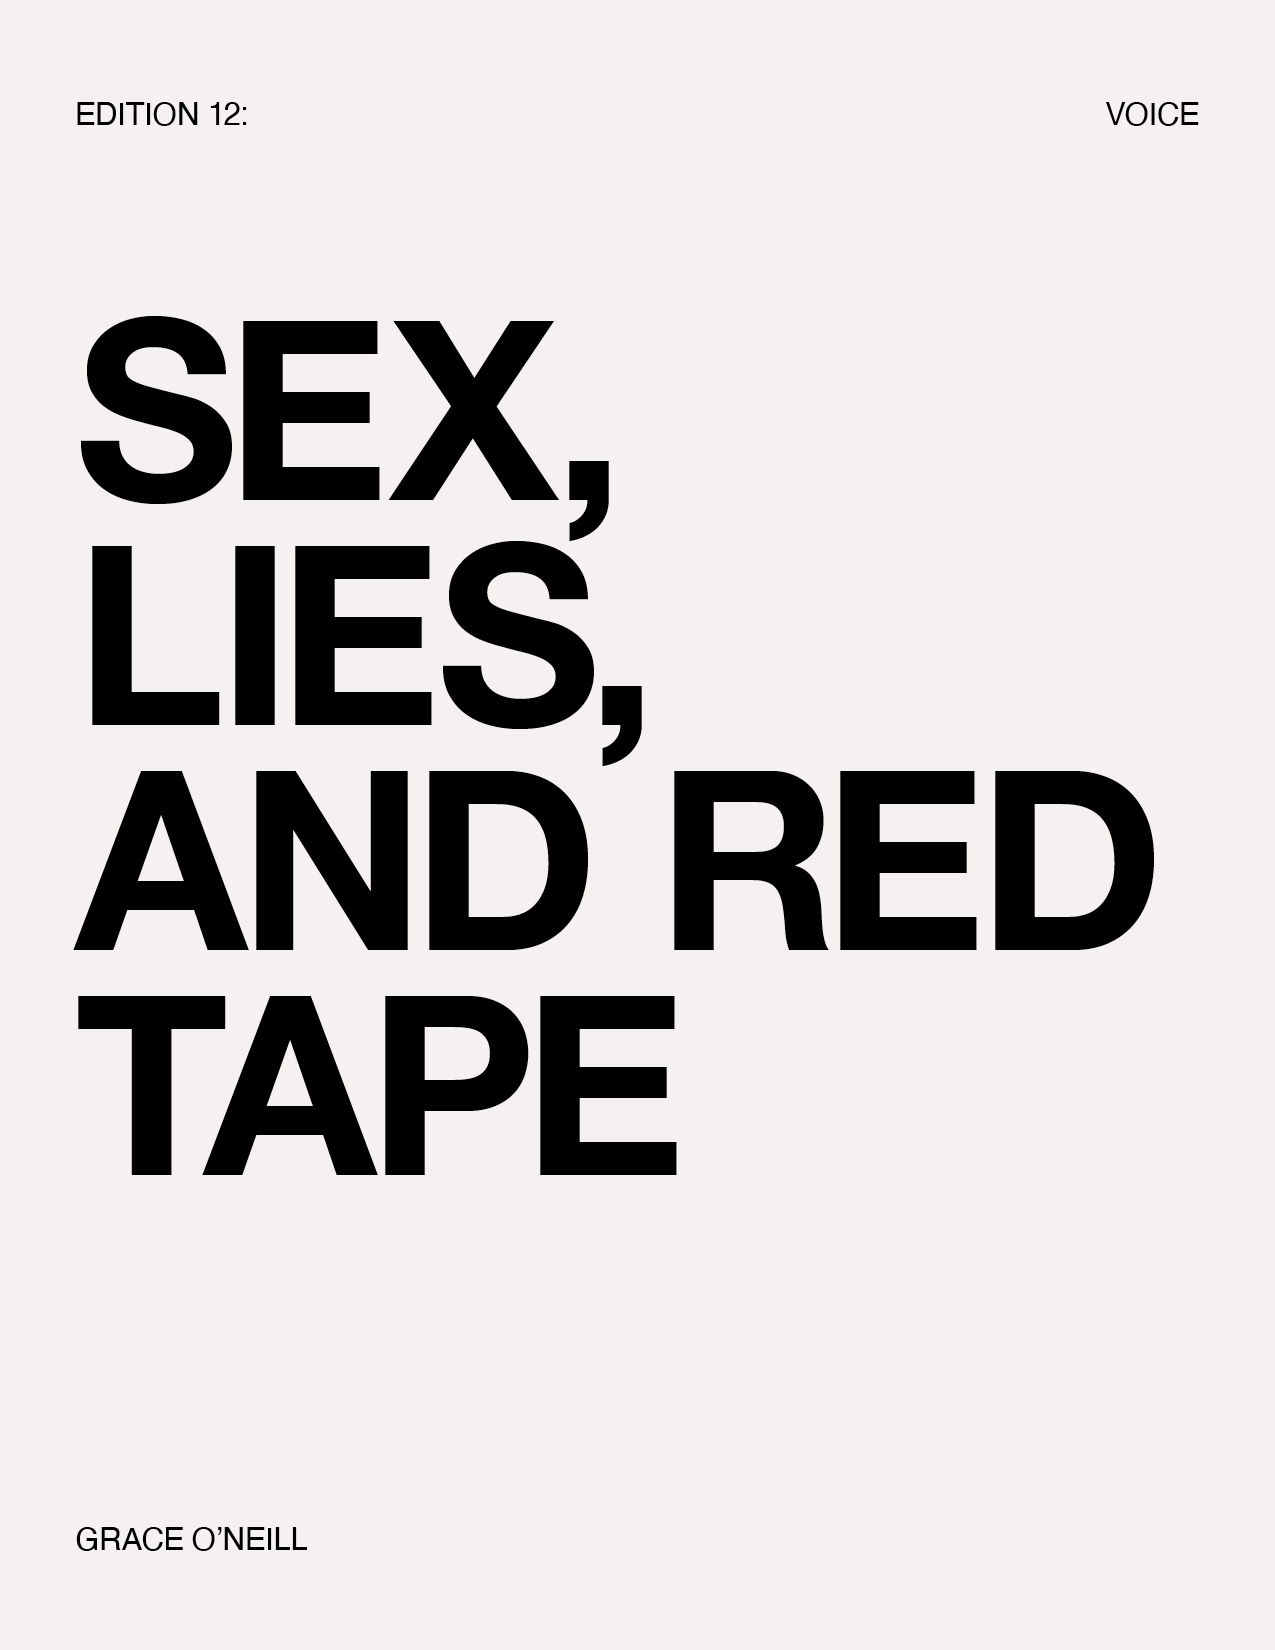 Jem Wolfie Nude - SEX, LIES, AND RED TAPE BY GRACE O'NEILL - SIDE-NOTE